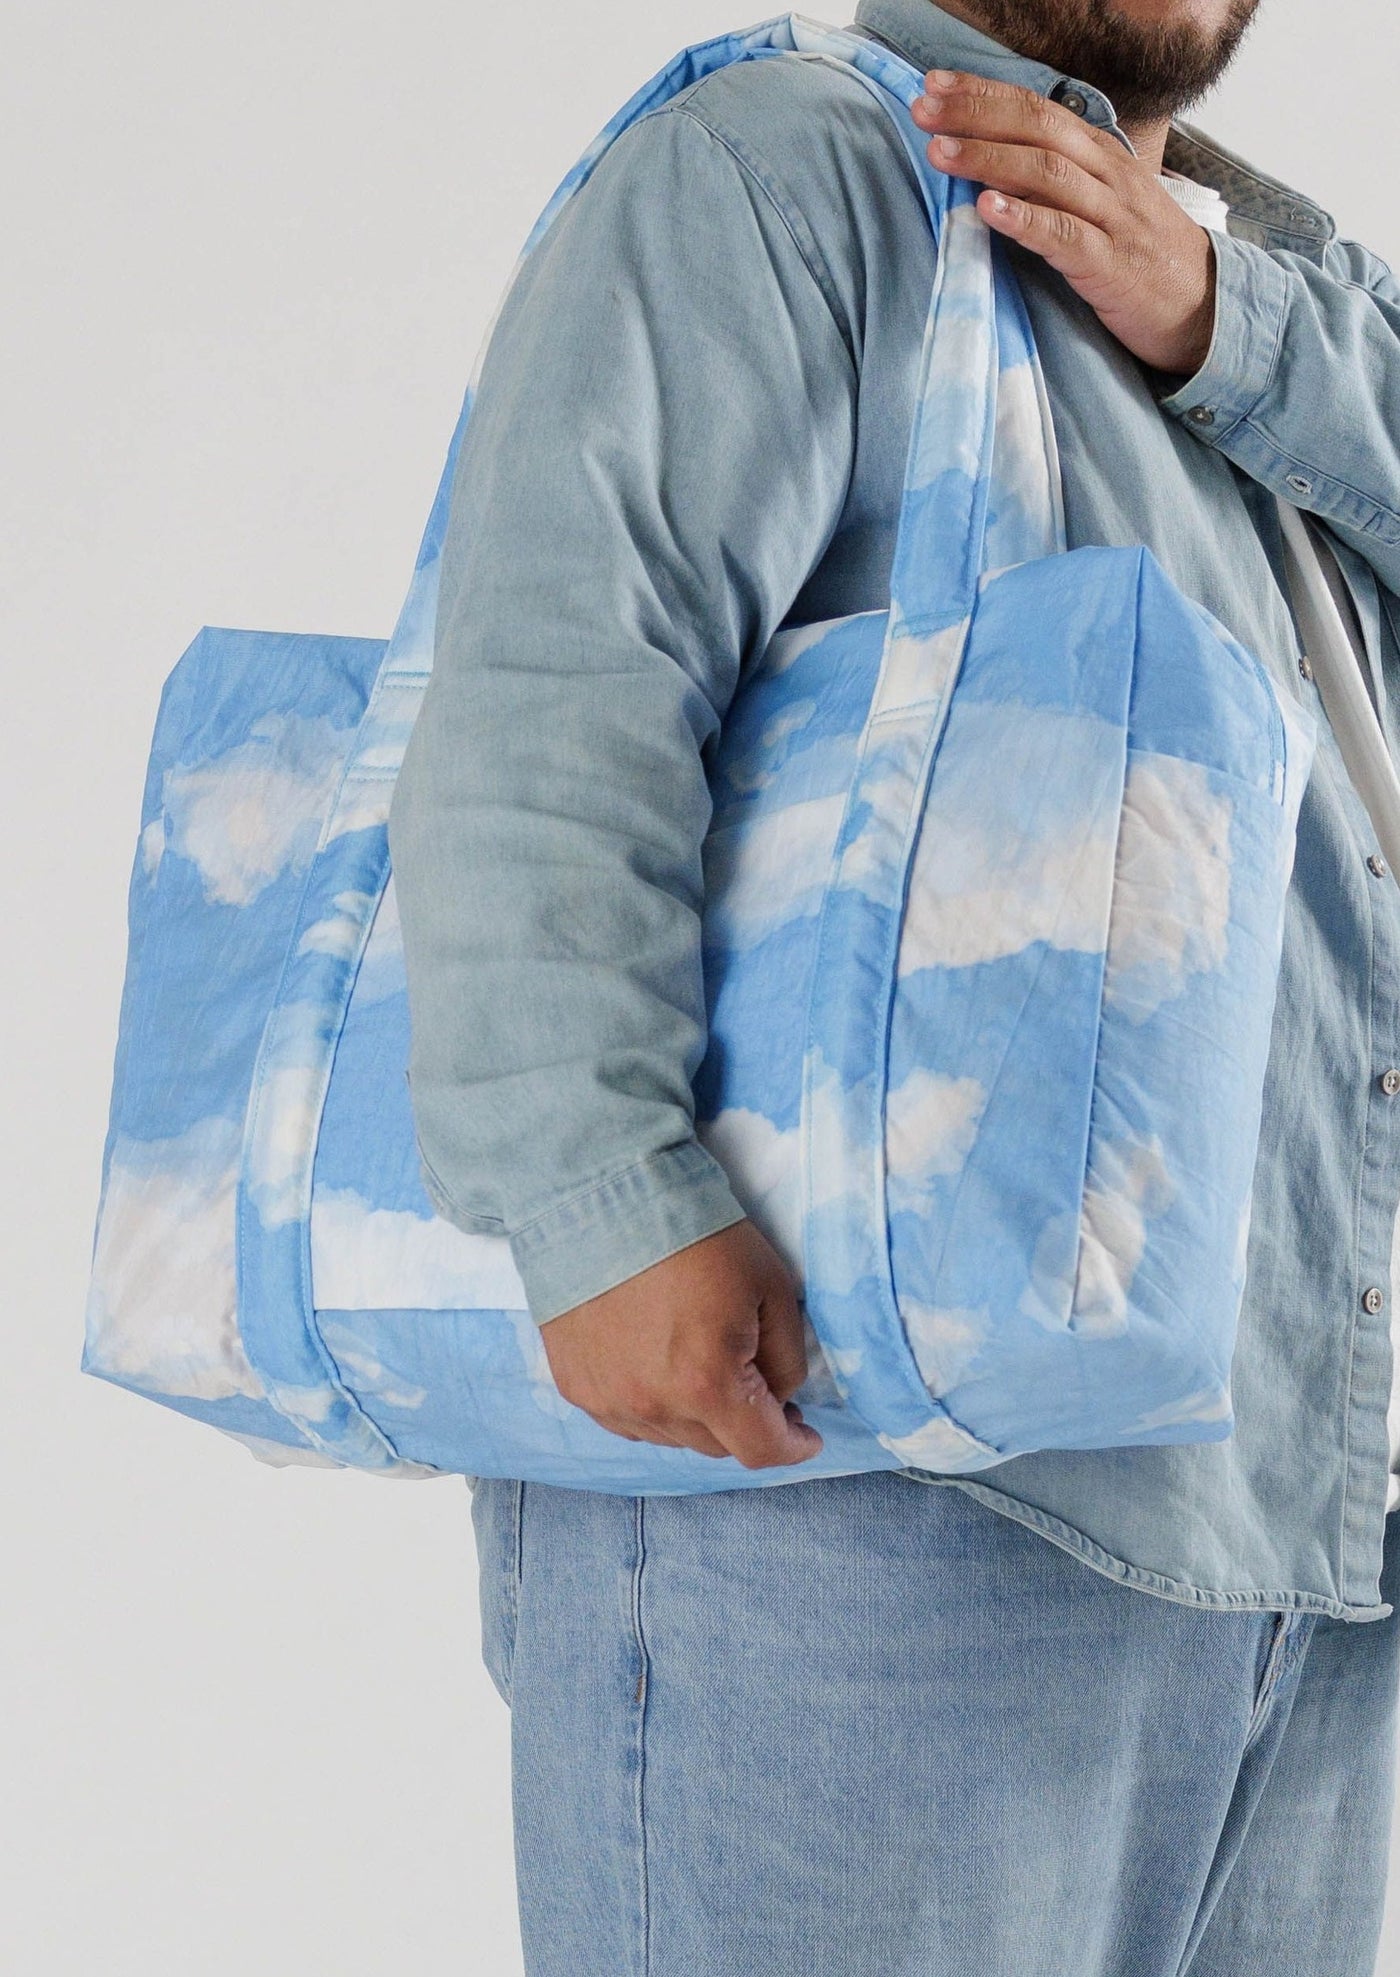 Cloud Bag Carry-On, Clouds